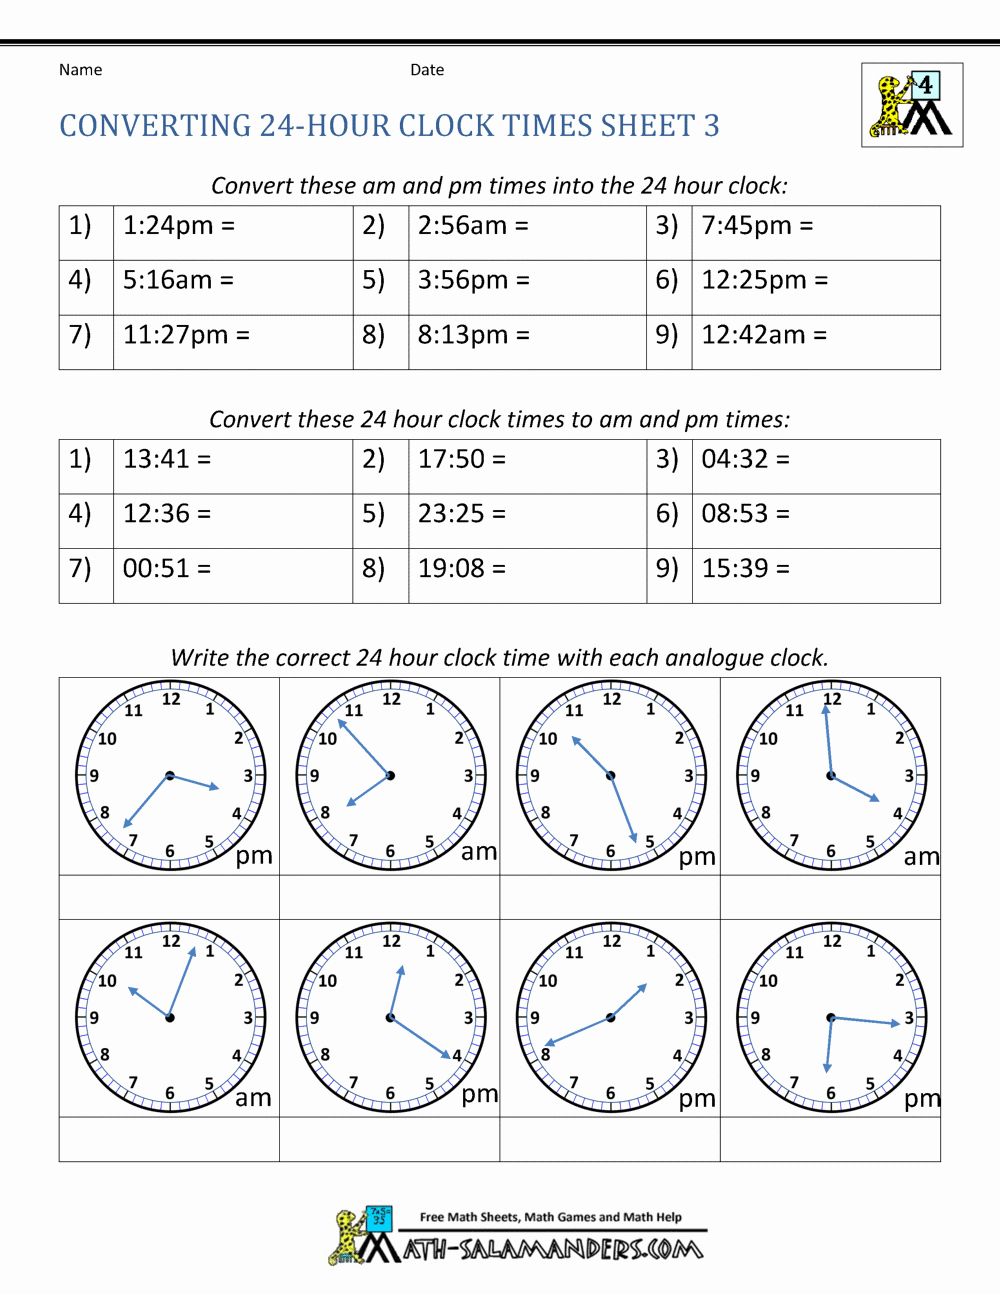 Military Time Conversion Sheet Awesome 24 Hour Clock Conversion Worksheets